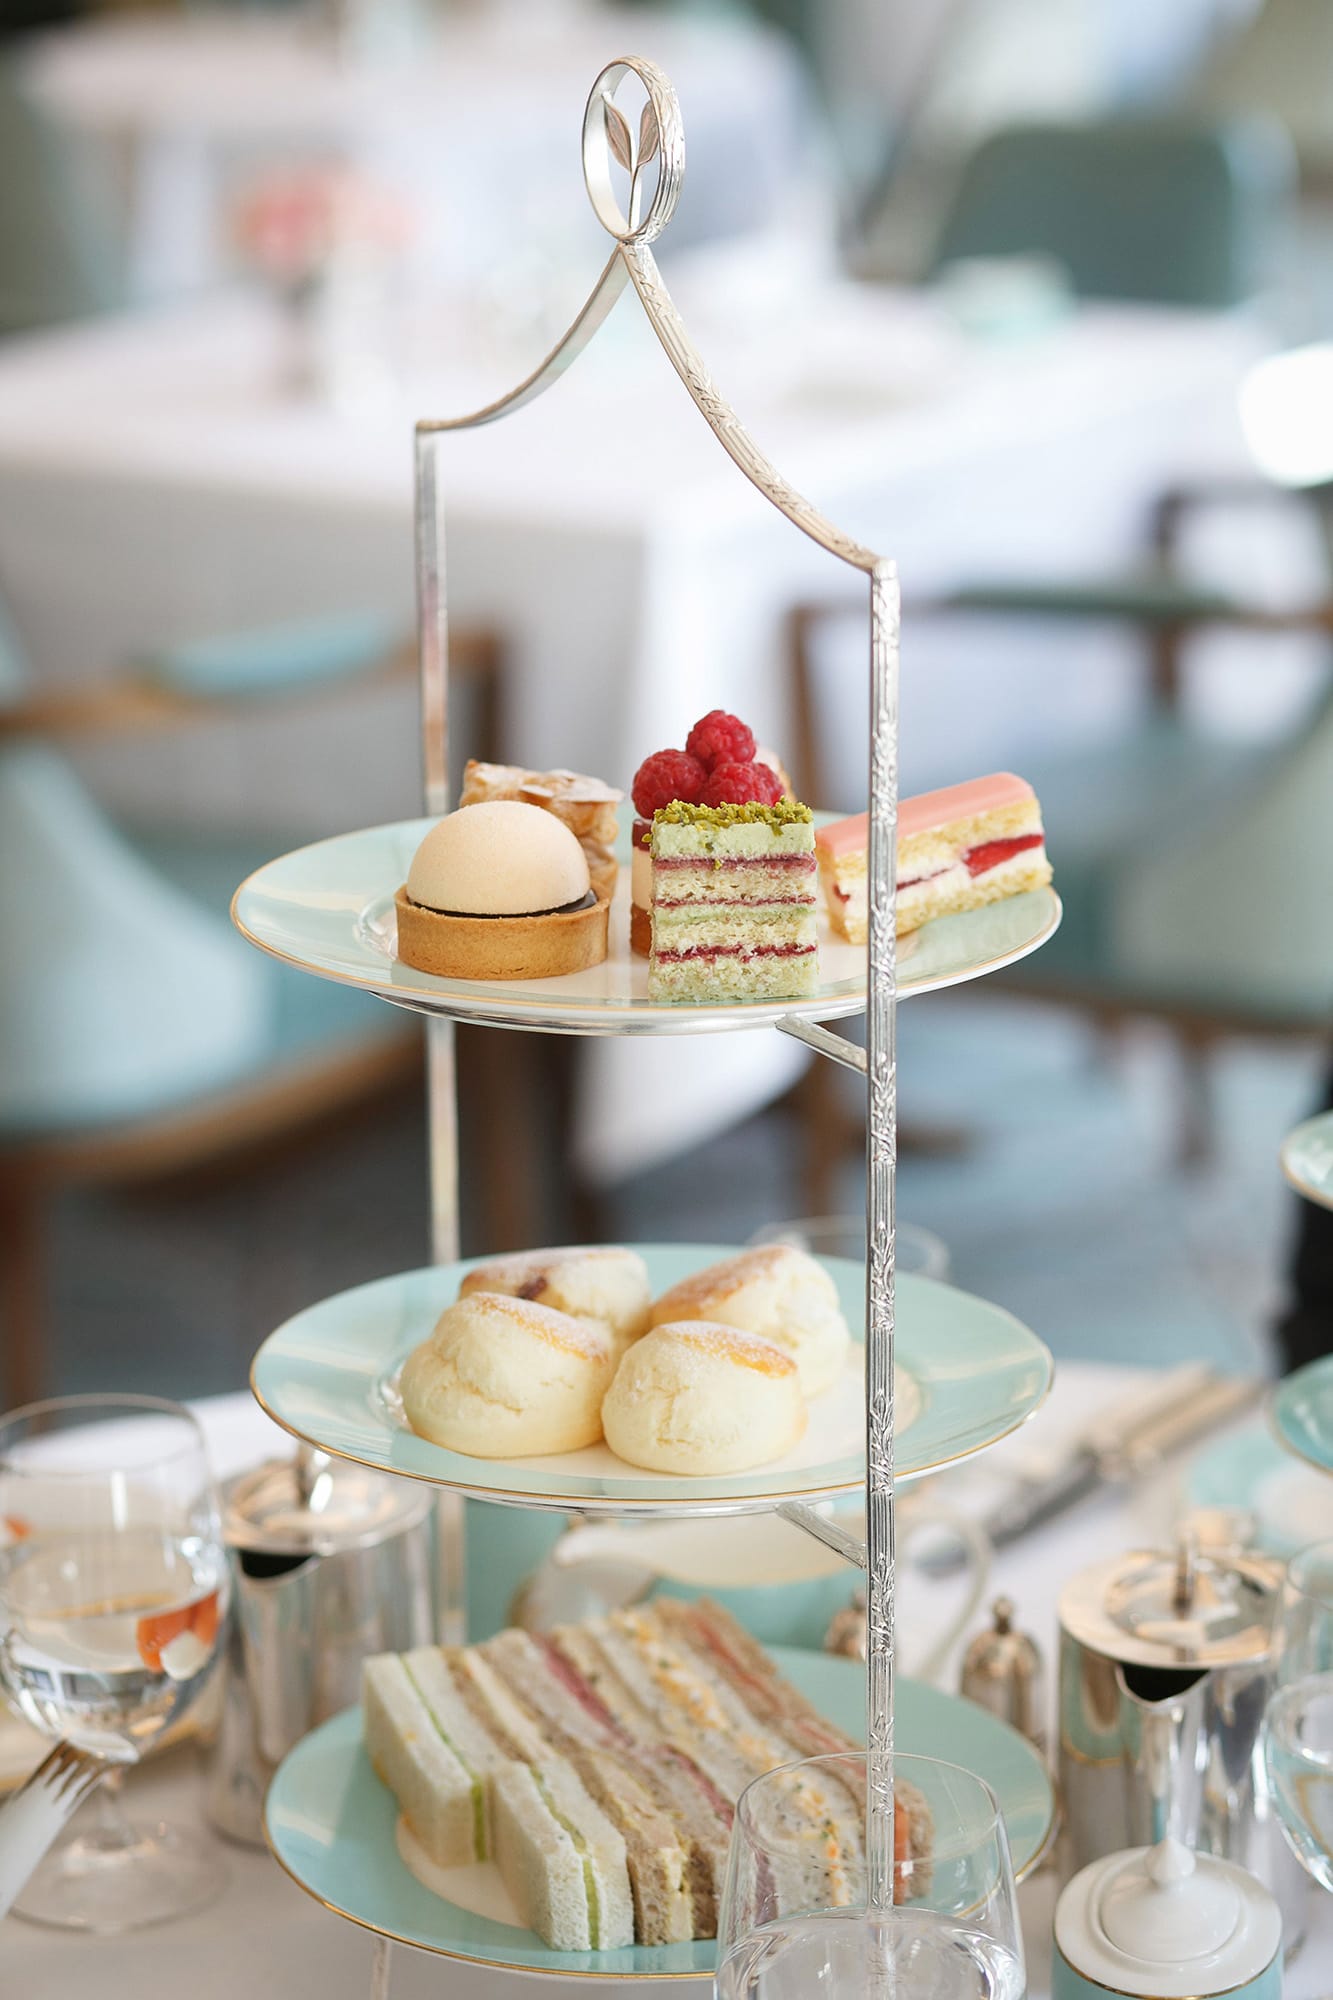 "I can imagine bringing a group of friends here to enjoy" afternoon tea in Fortnum & Mason's Diamond Jubilee Tearoom, pastry chef Hideko Kawa says.